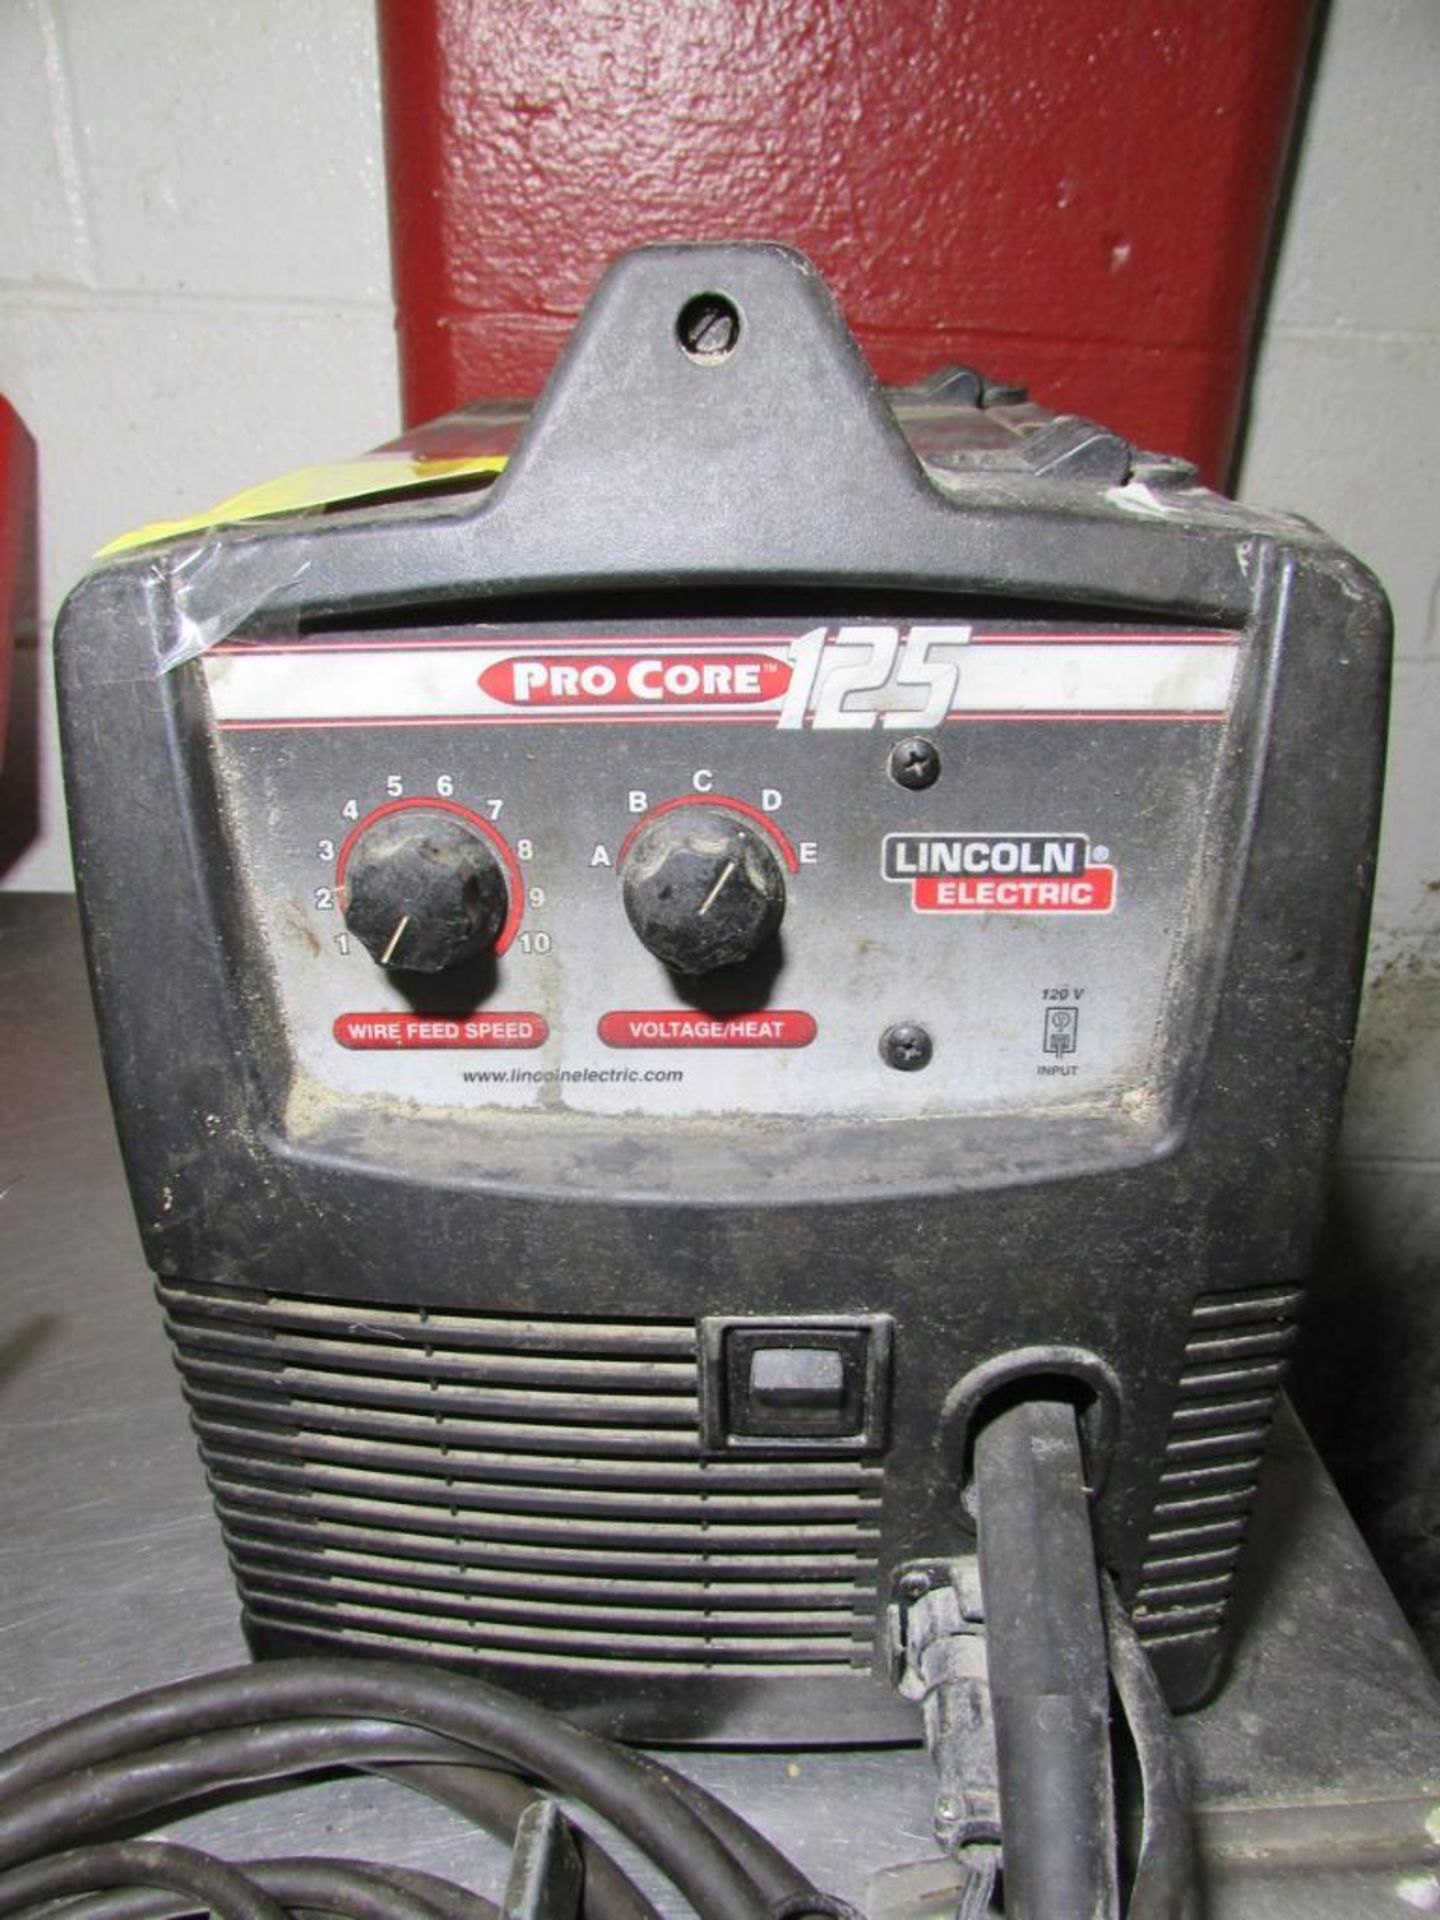 Lincoln Electric Pro Core 125 MIG Wire Welder. 30-125A, 90A 19V 20% Duty Cycle Output, 120V 20A 60Hz - Image 2 of 7